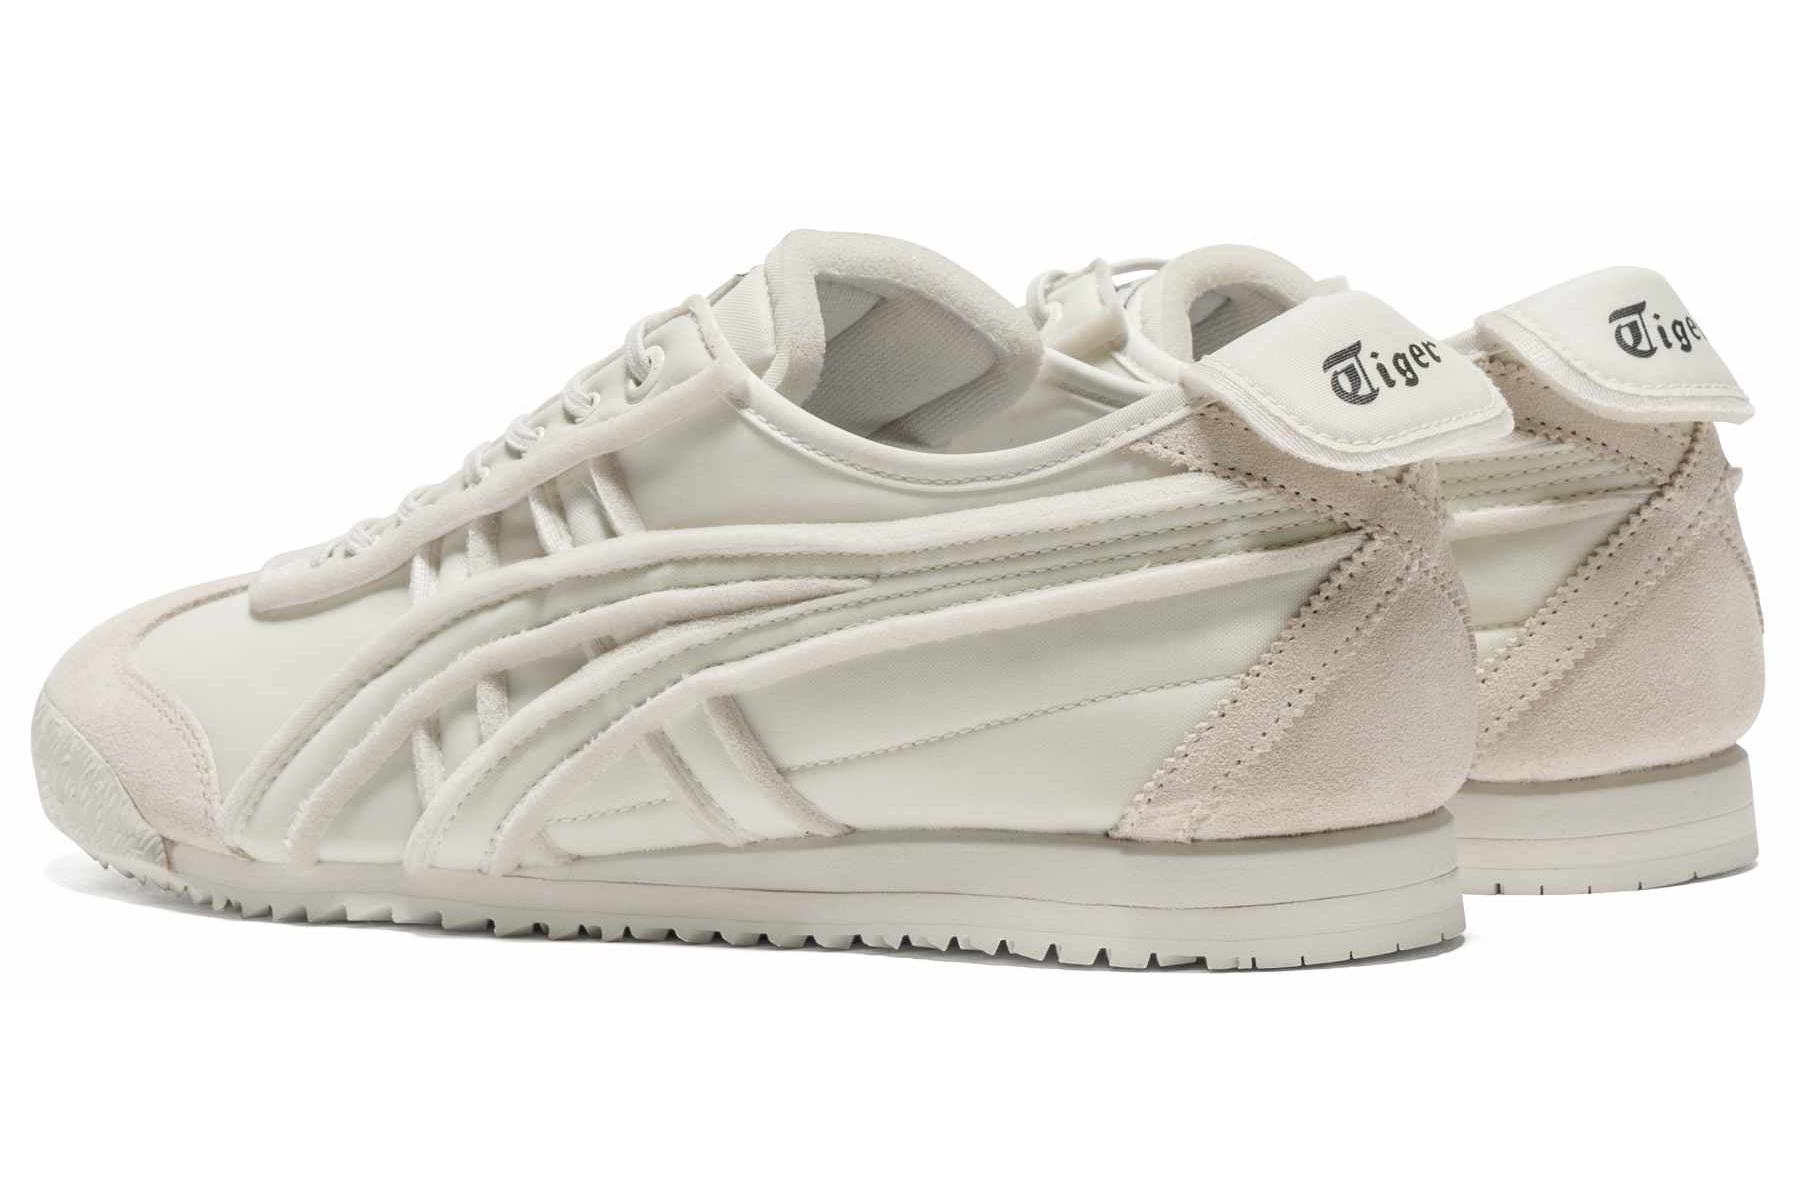 Onitsuka Tiger's Mexico 66 sneaker with a nylon upper in white and navy colorways